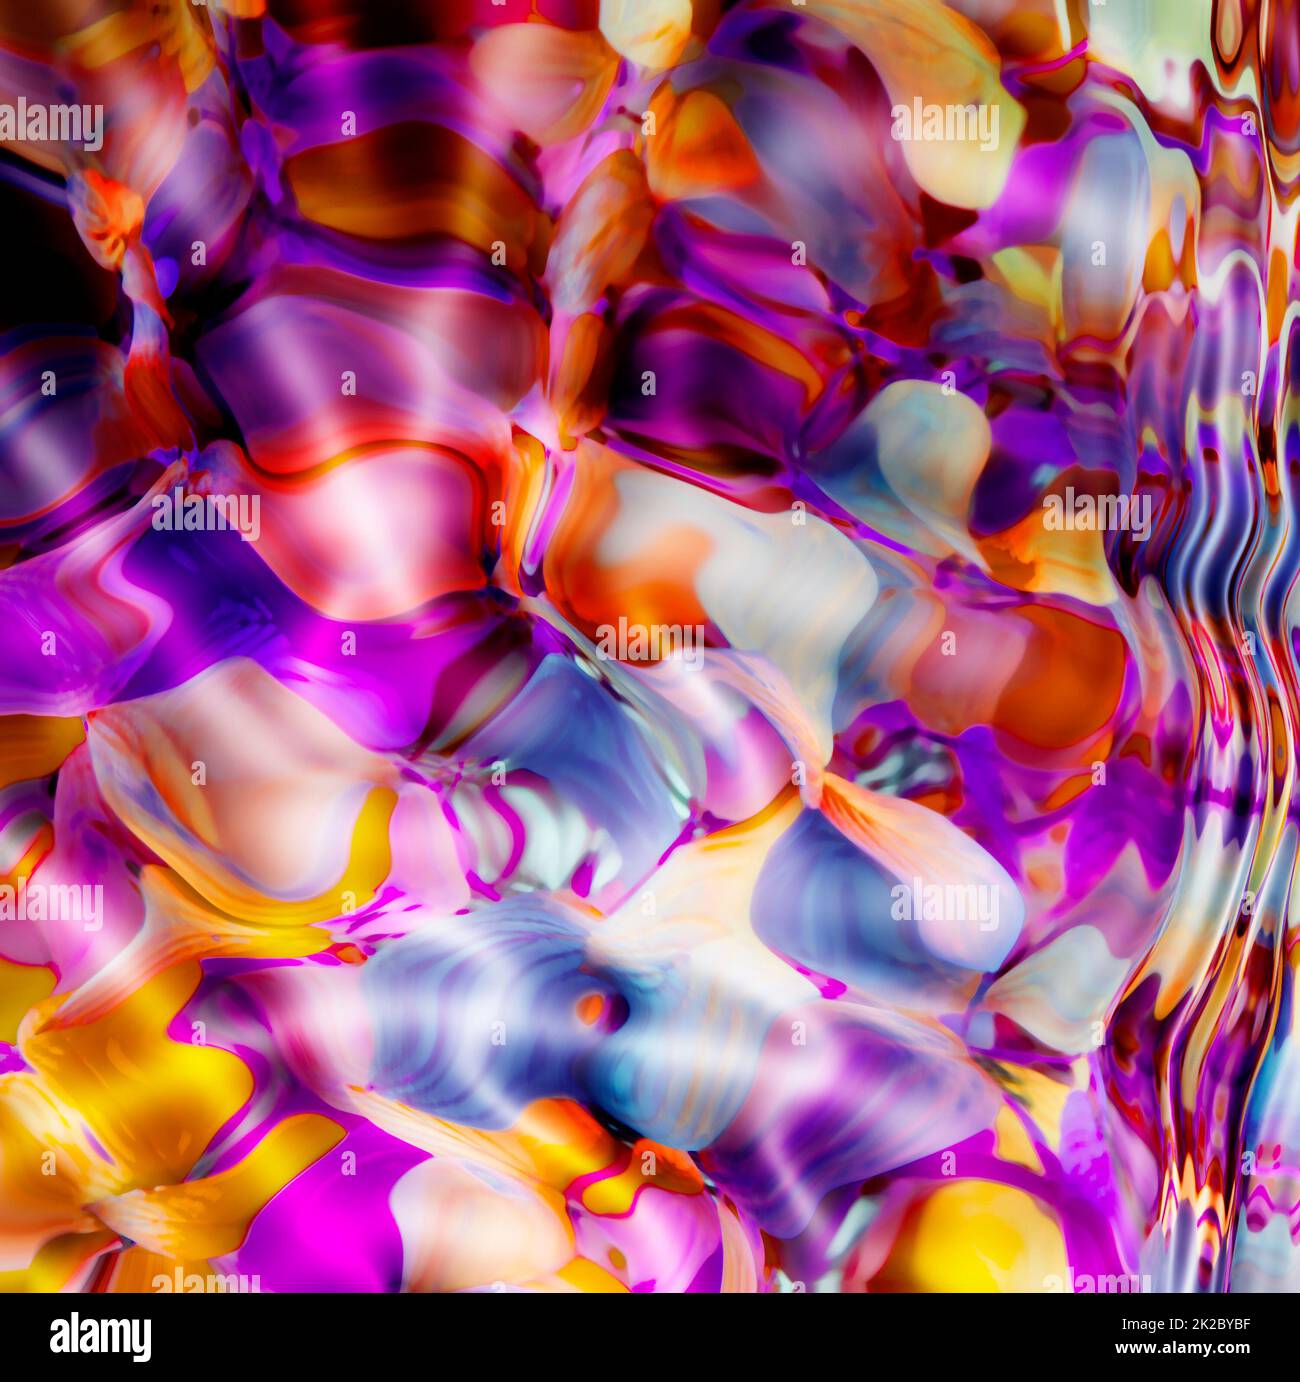 Colour your imagination. Shot of a colourful abstract background. Stock Photo